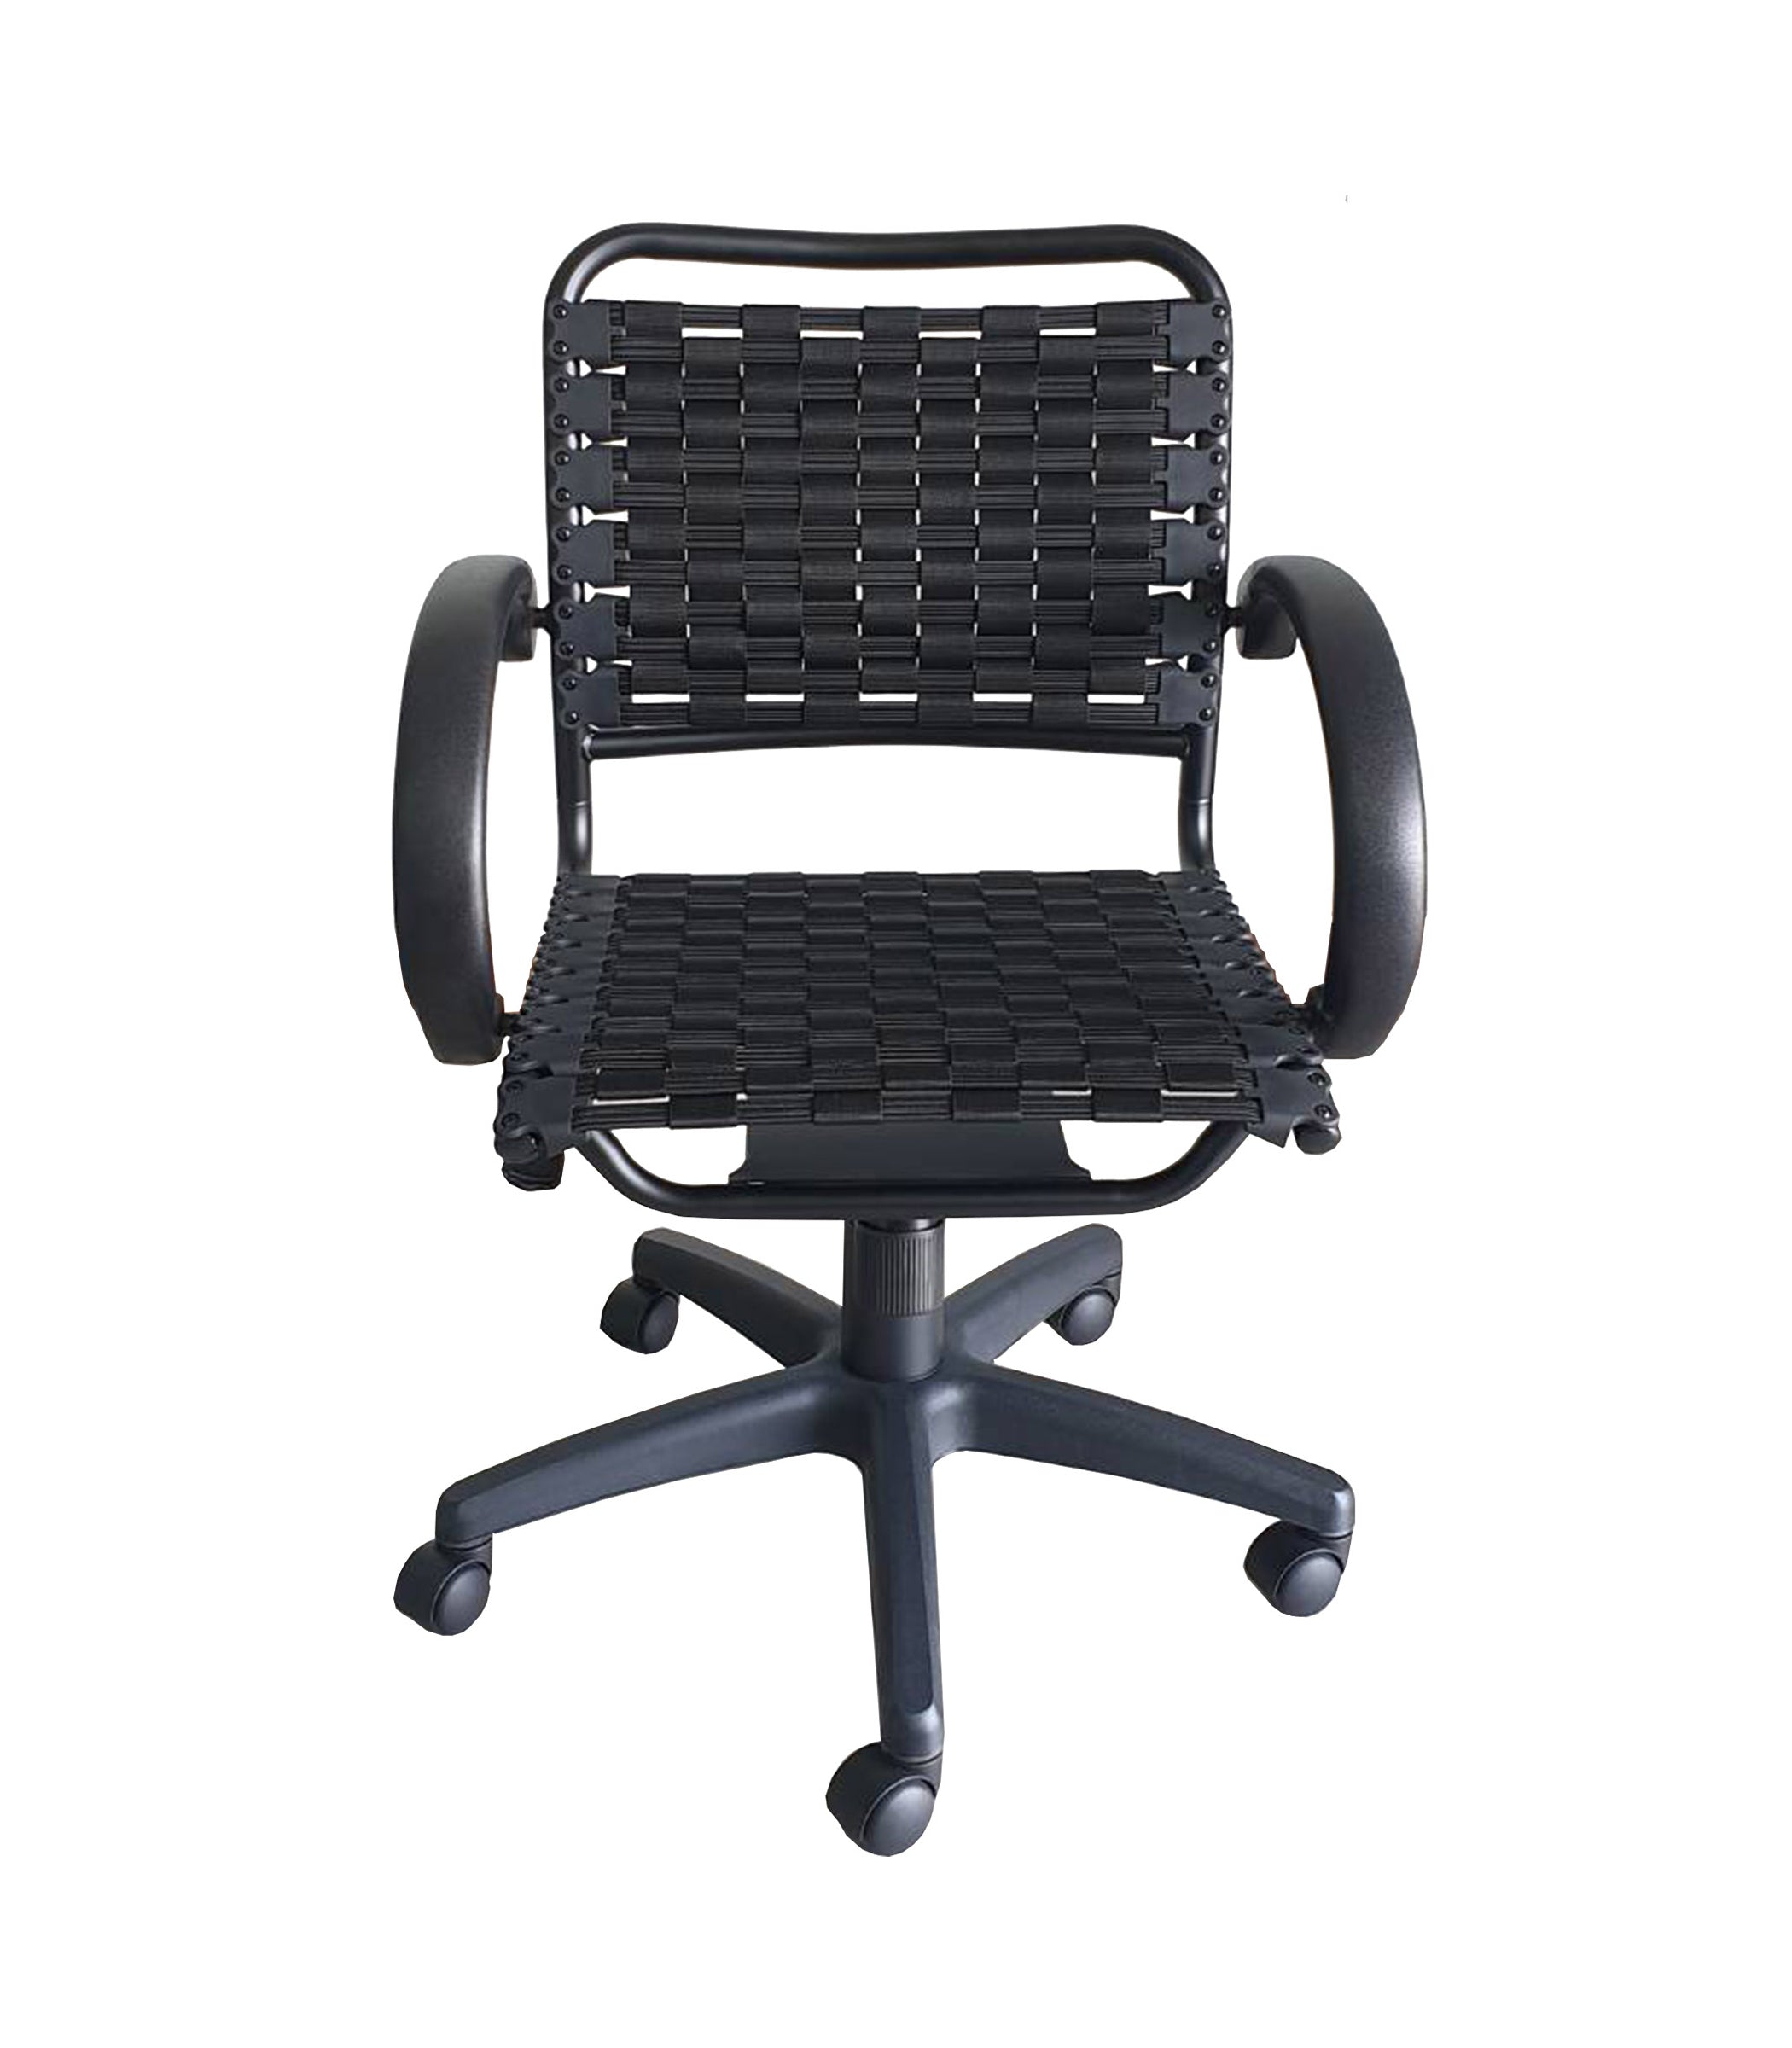 ZNTS Bungee Arm Office Chair With Black Coating B091119807